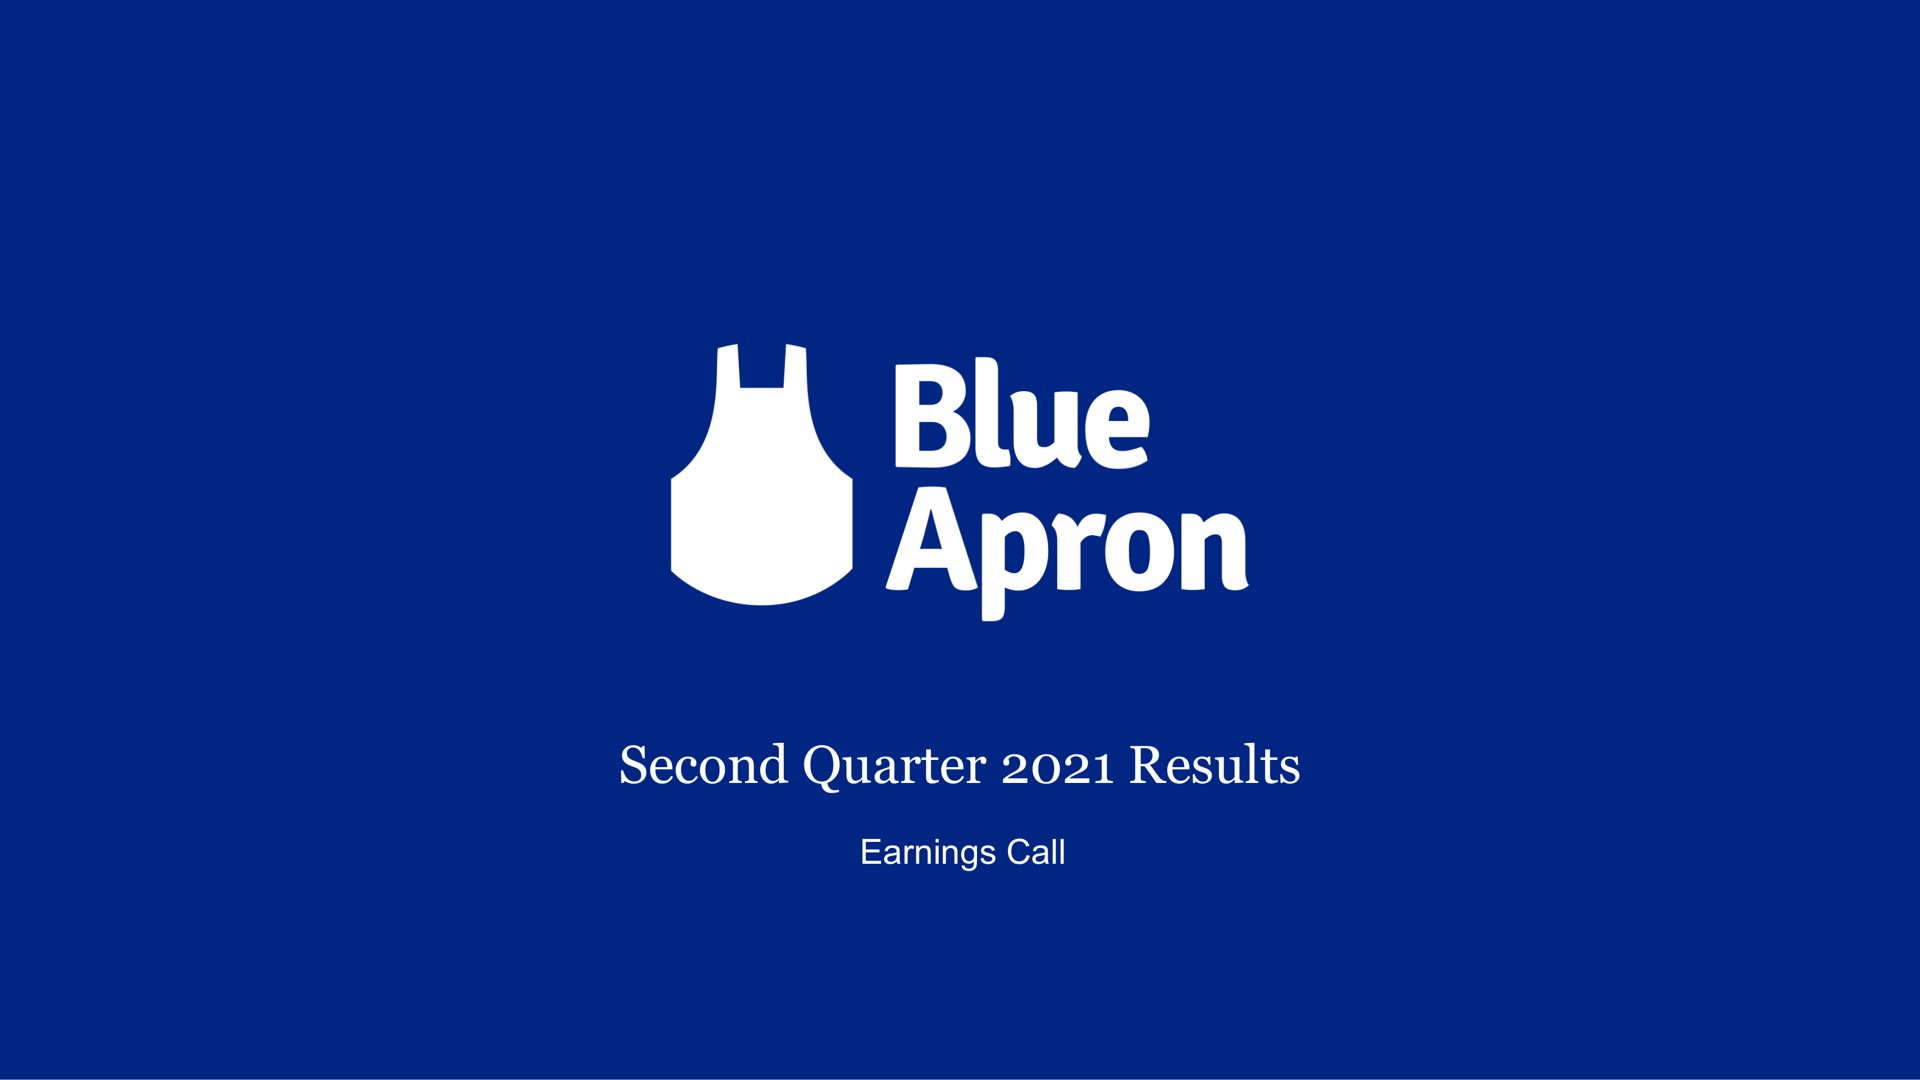 second quarter results earnings call blue apron | Blue Apron